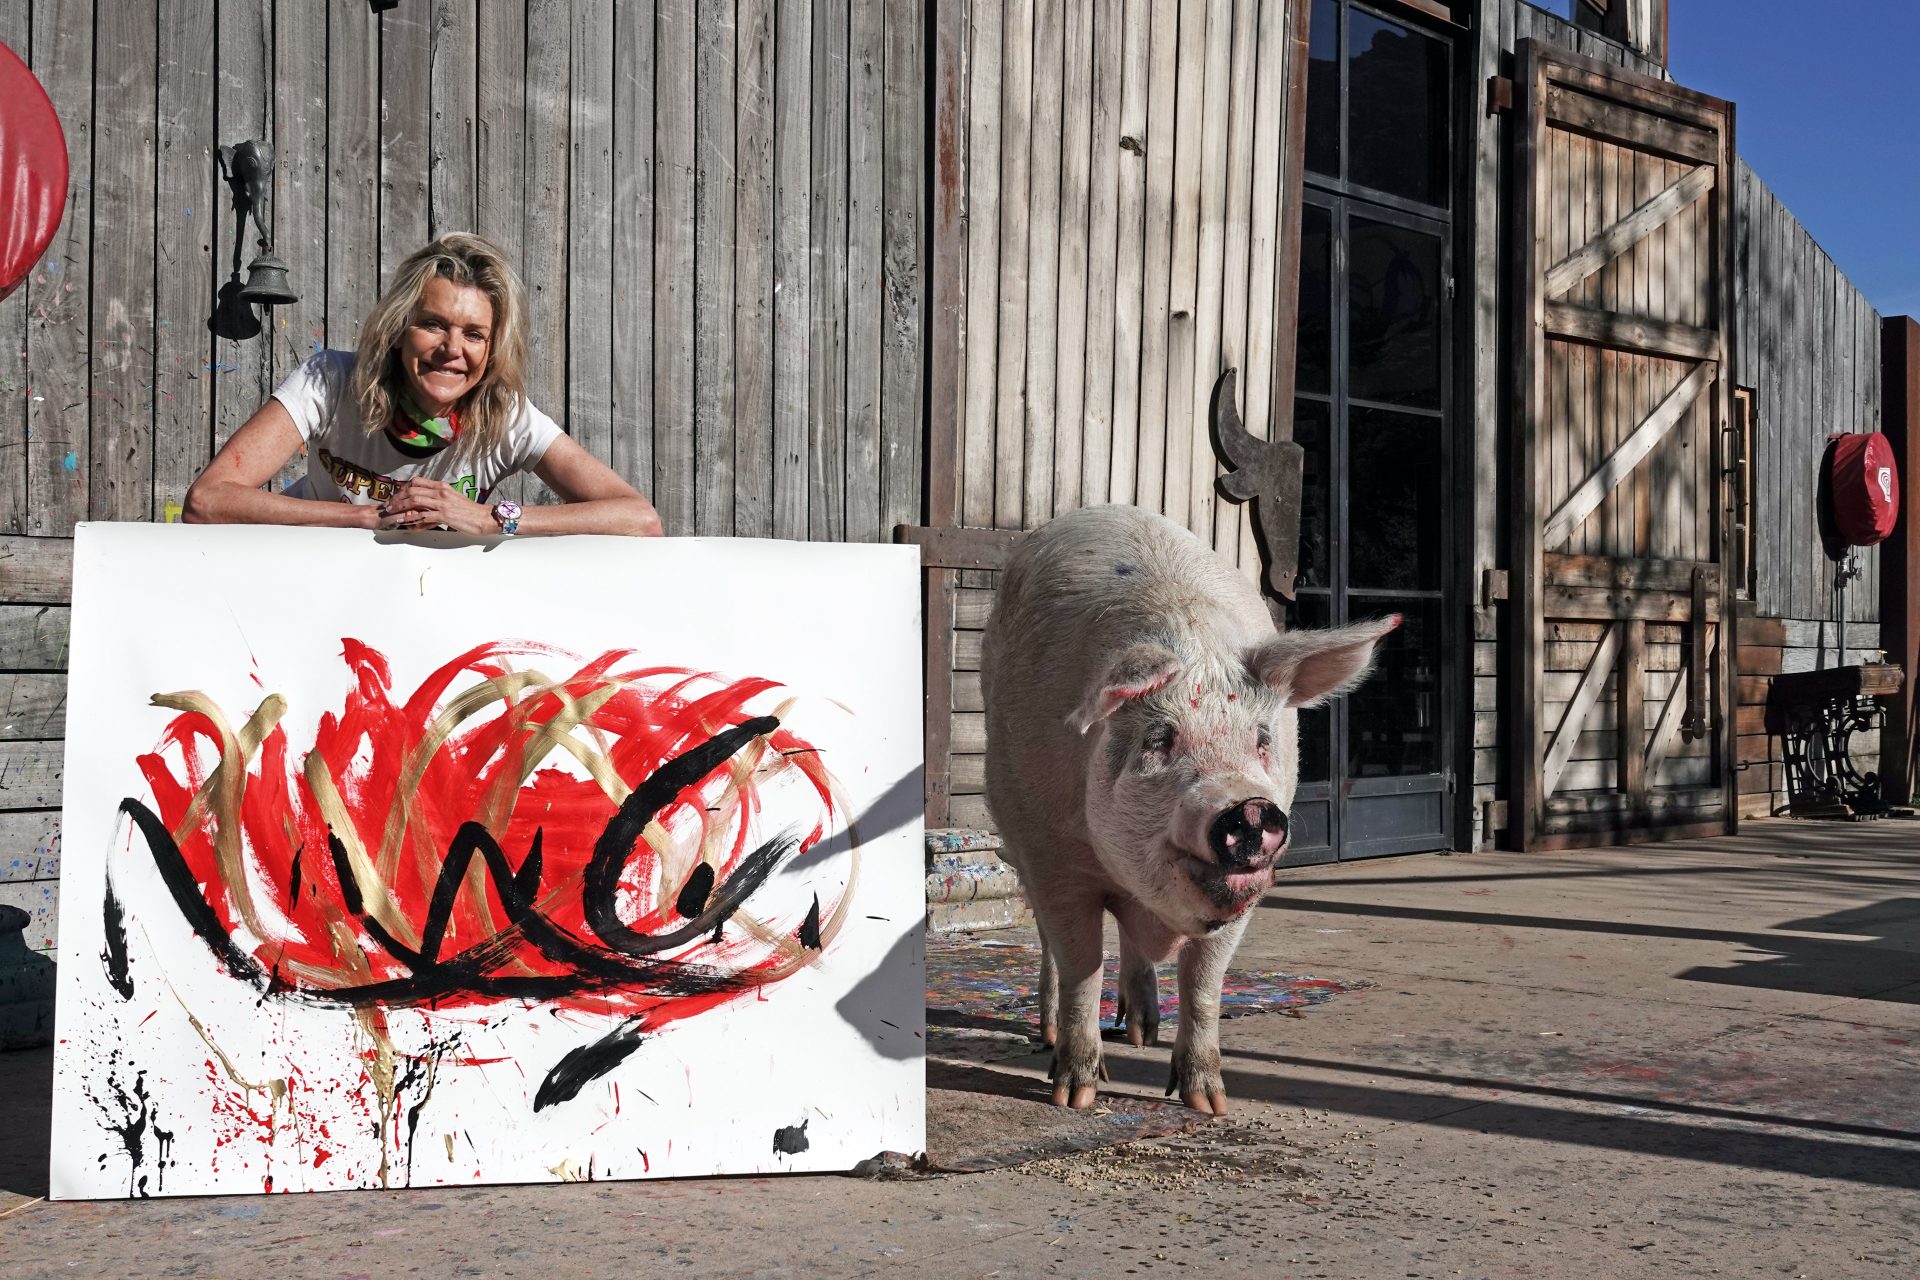 Pigcasso, the hottest painter in town, makes thousands of dollars with her art